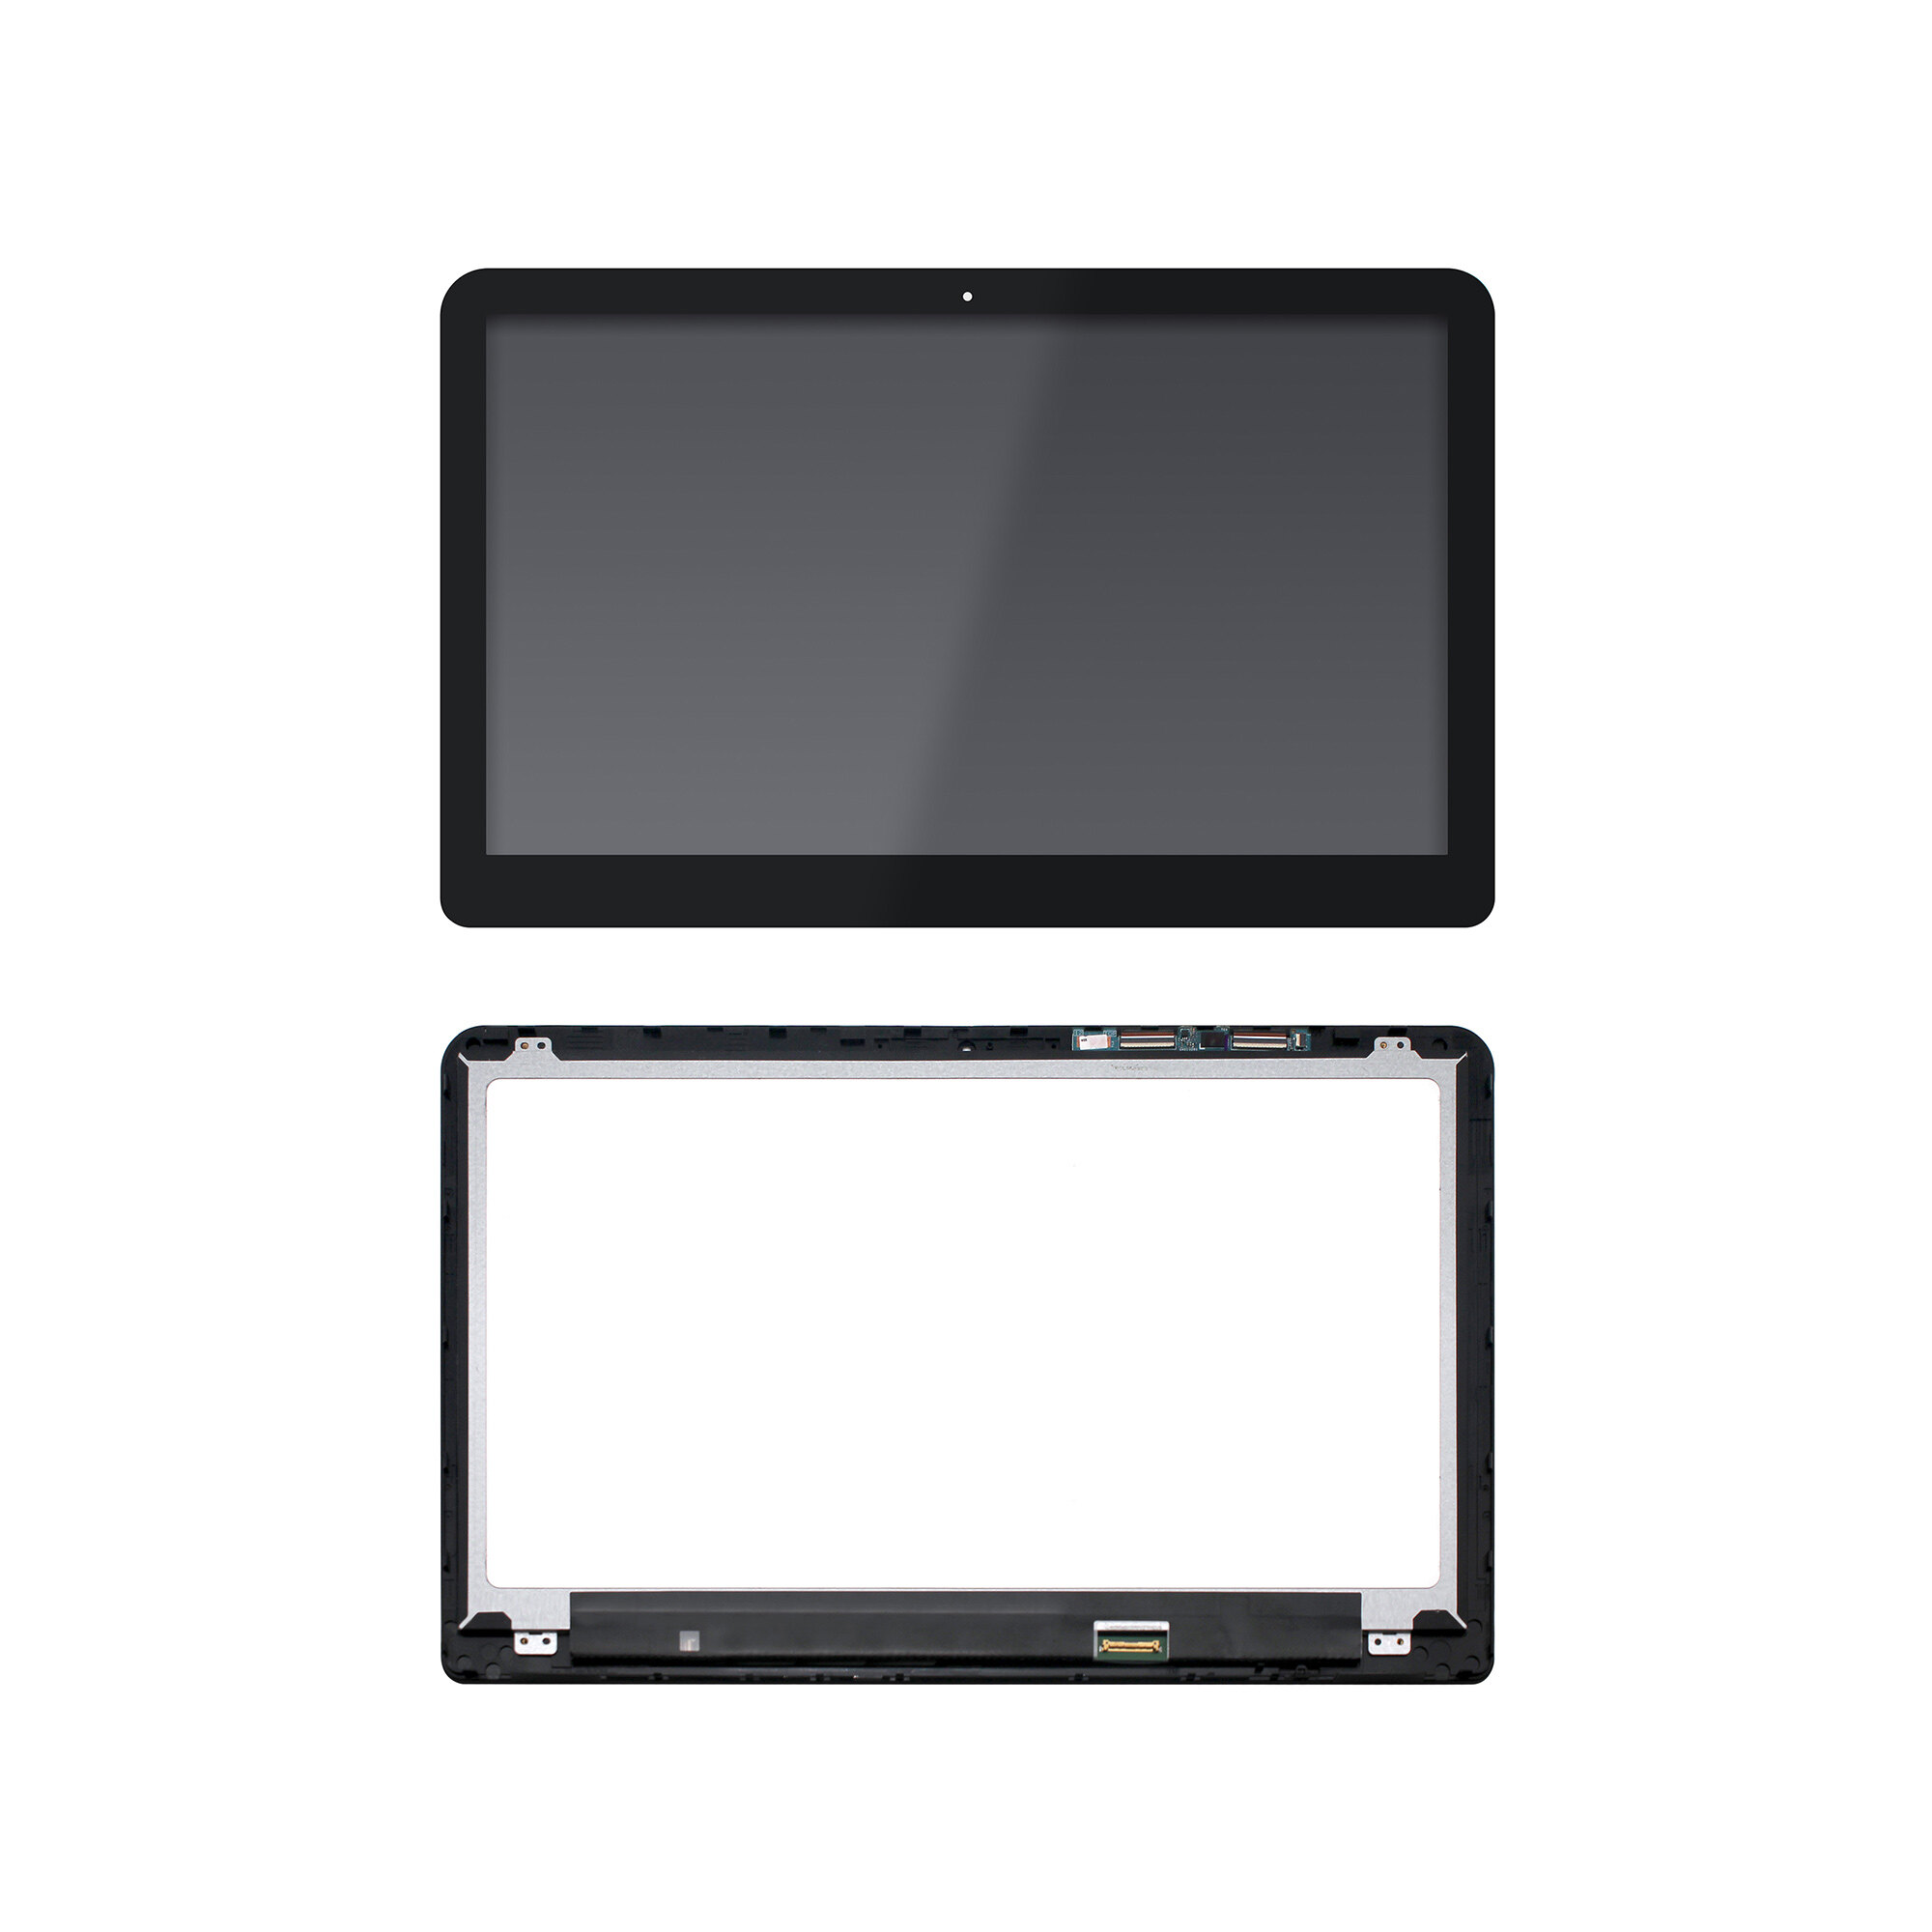 Kreplacement 15.6" LCD Touch Screen Digitizer Asssembly for HP ENVY X360 M6-W010dx M6-W011dx